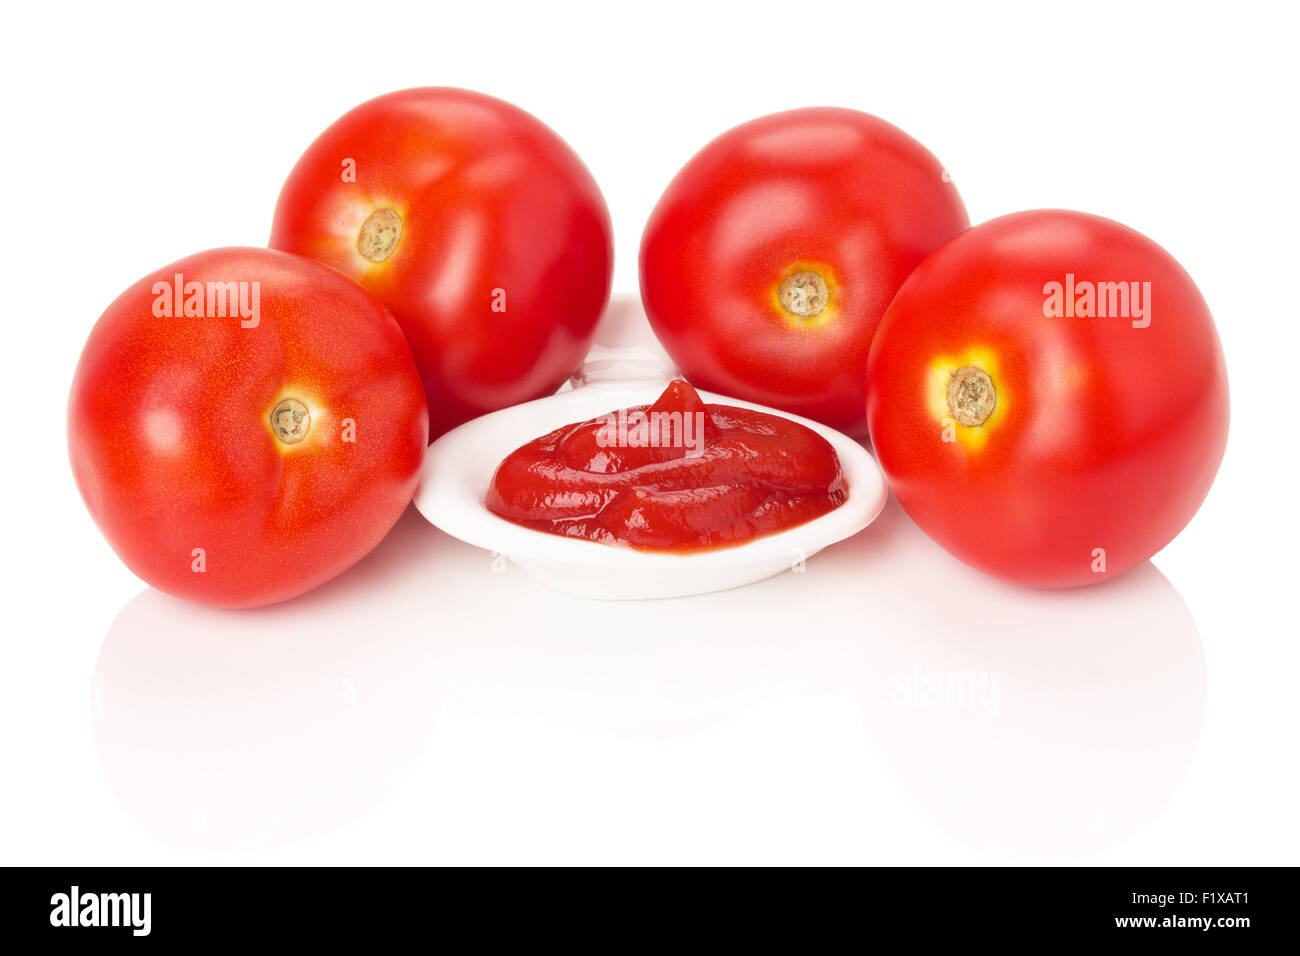 Bowl with tomato sauce and juicy red tomatoes isolated on the white background. Stock Photo